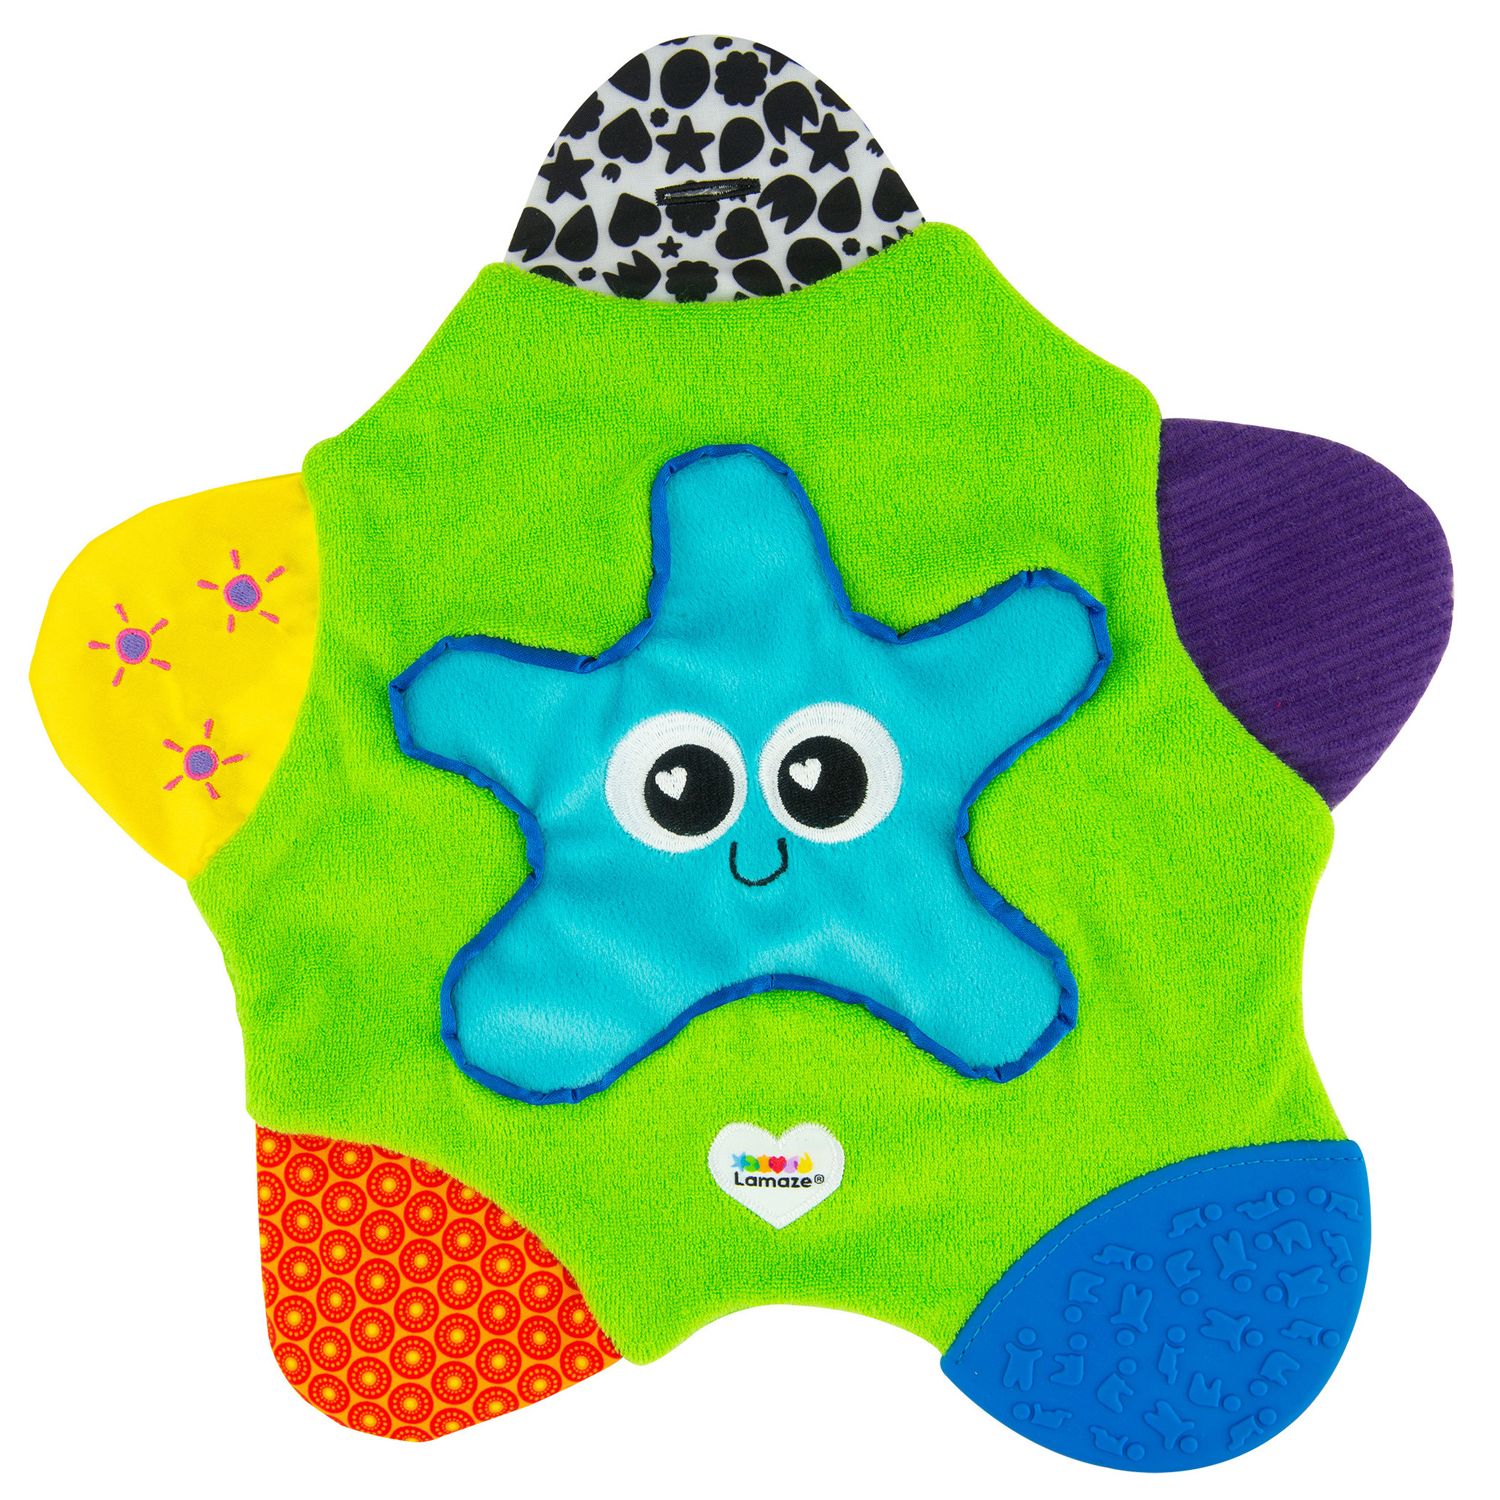 first years star teether